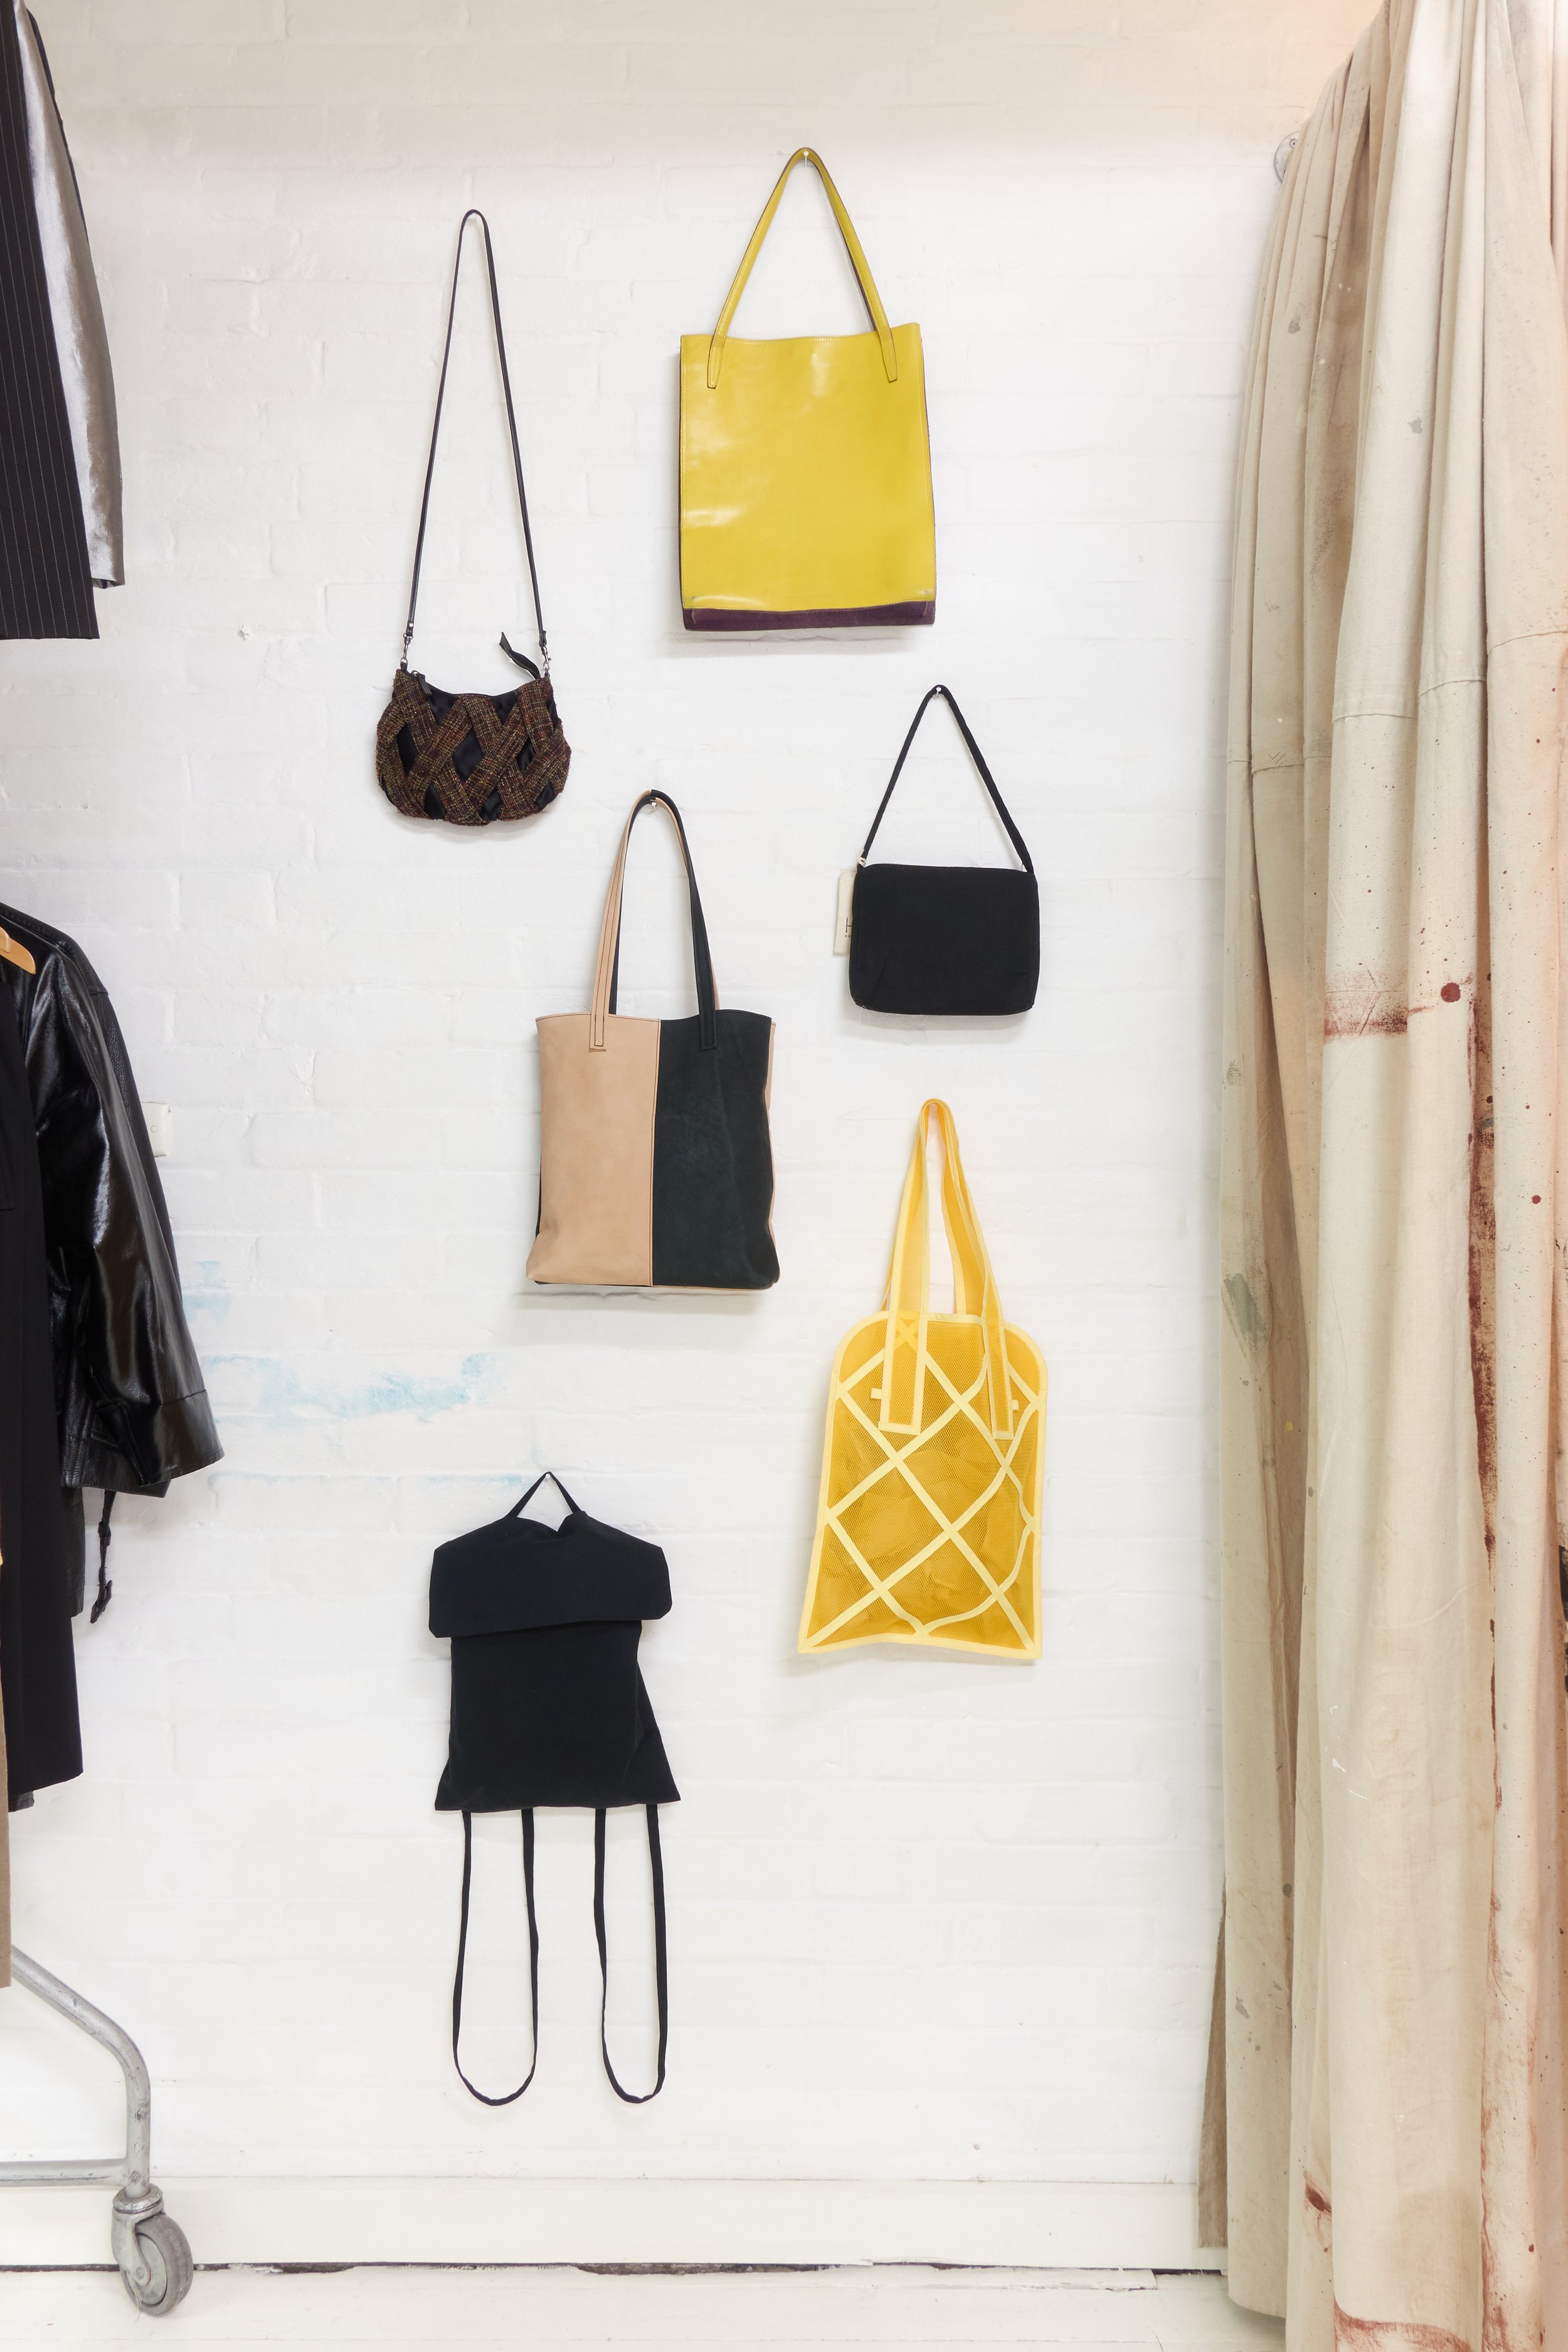 bags at a flat shop - group exhibition 319.jpg